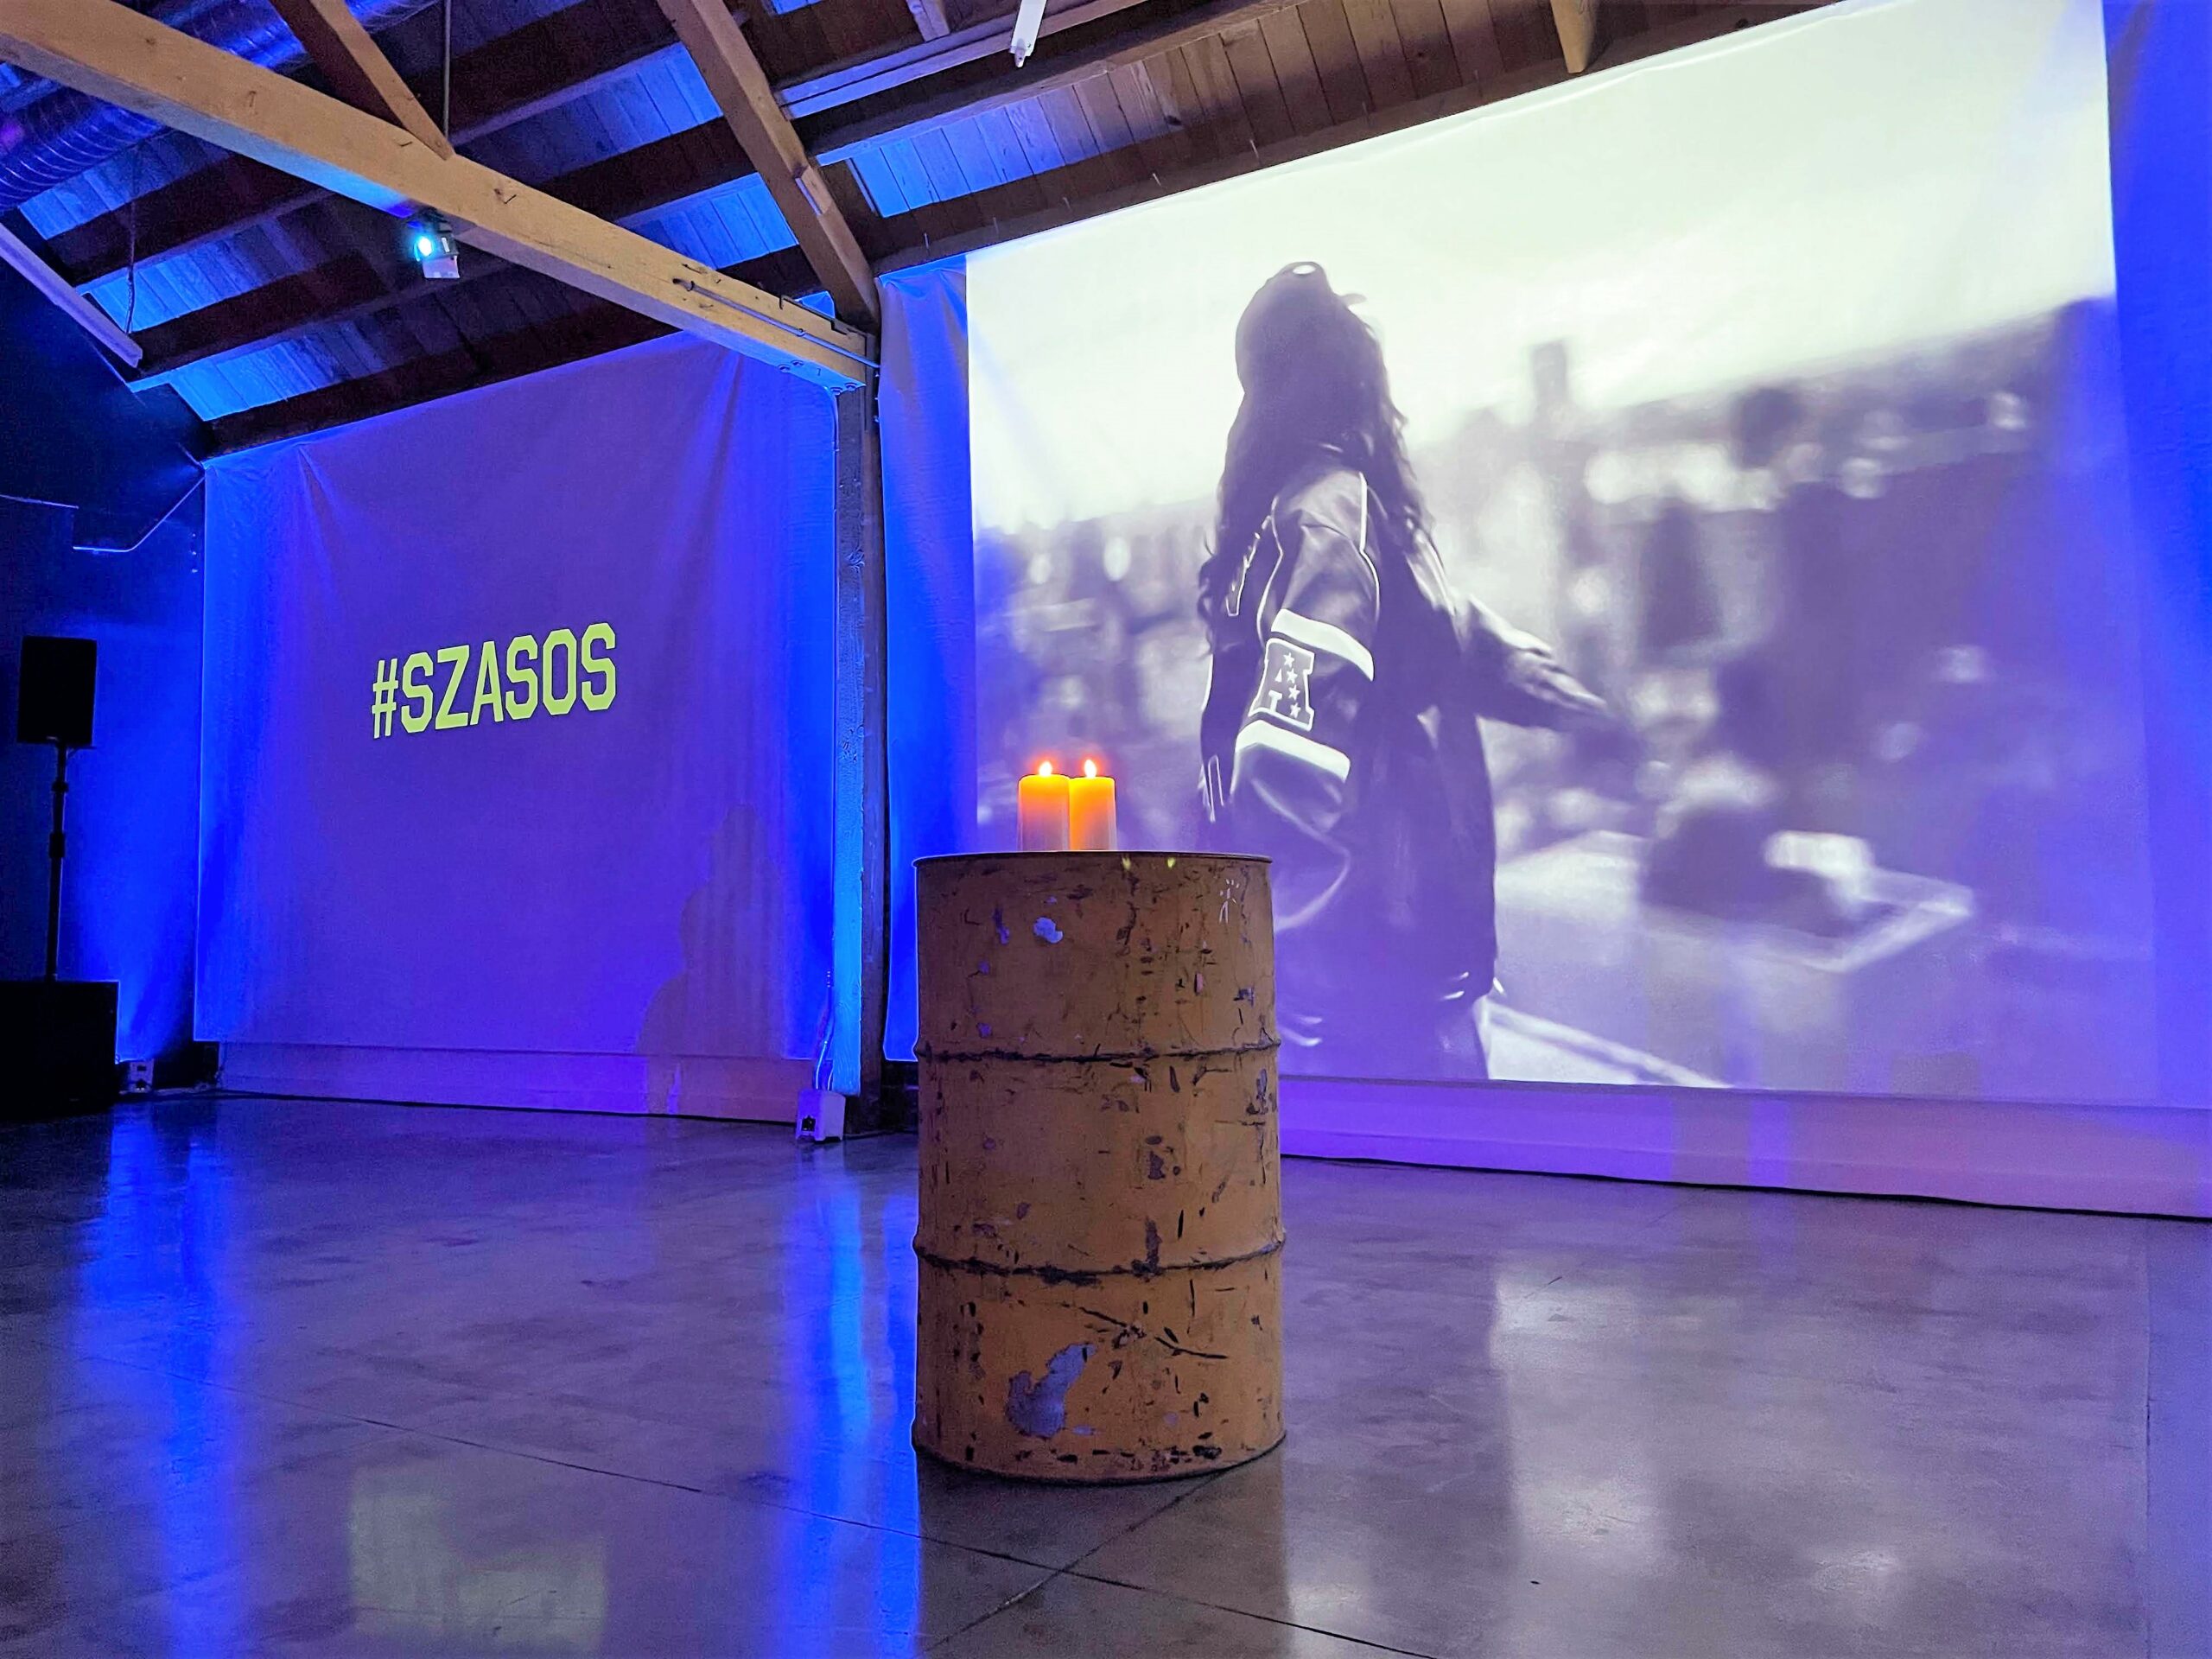 MG Studio SZA Album Release Party Projection Candles